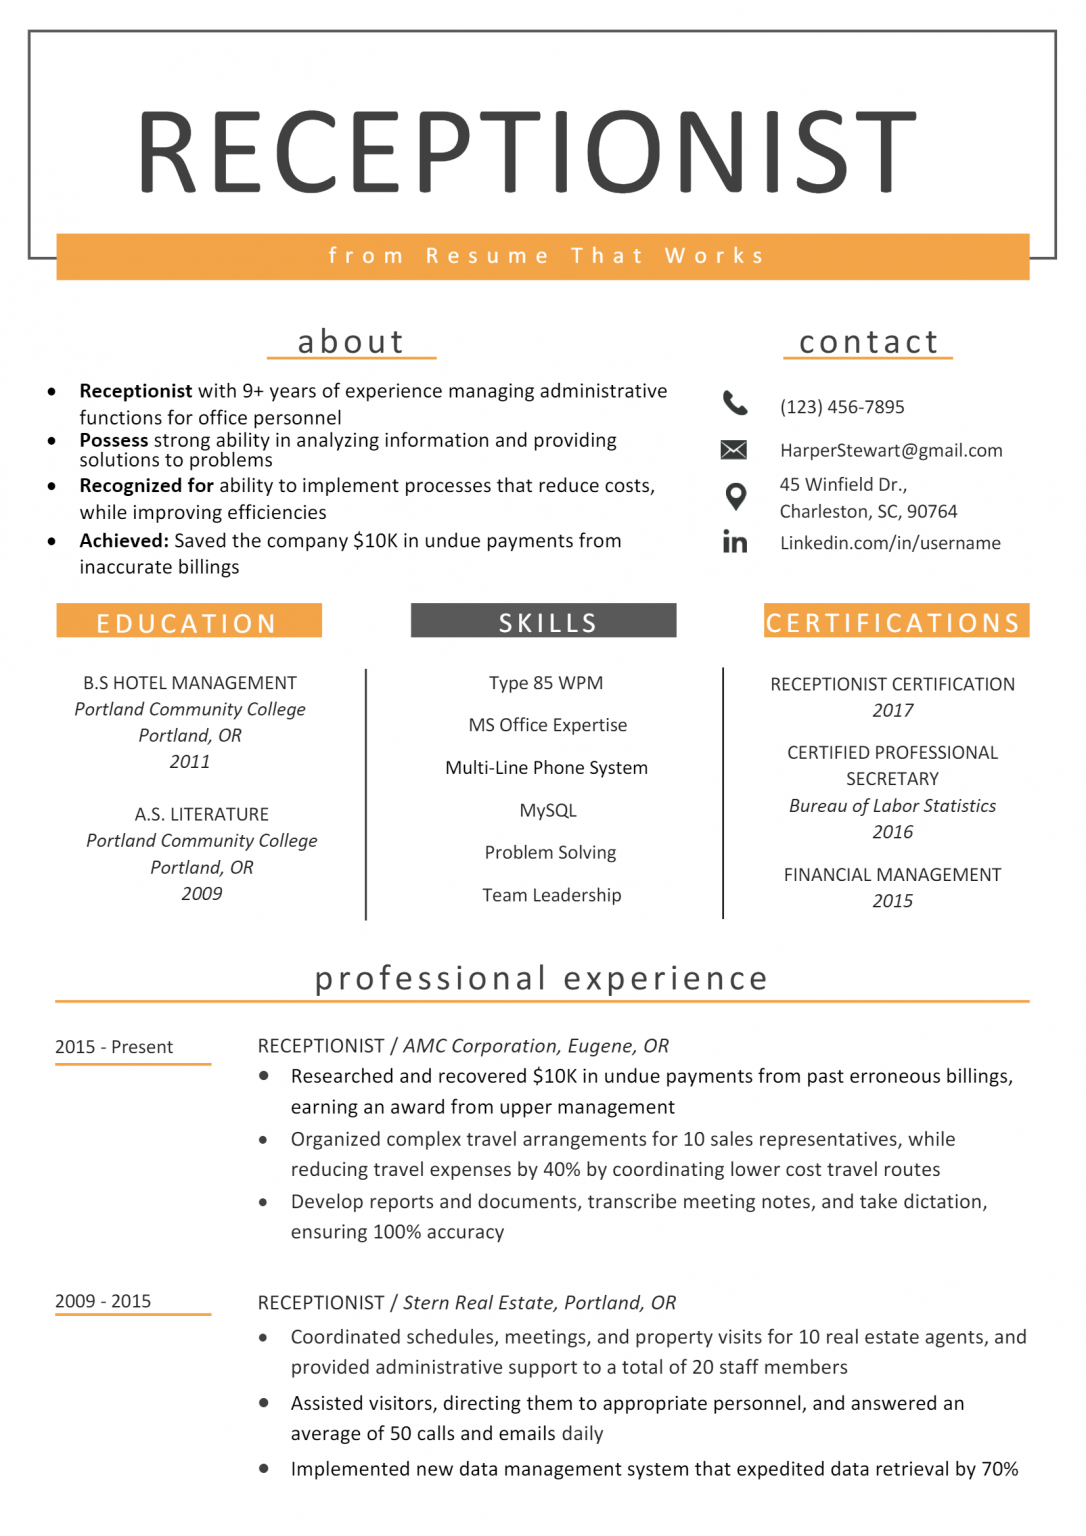 resume for receptionist fresher